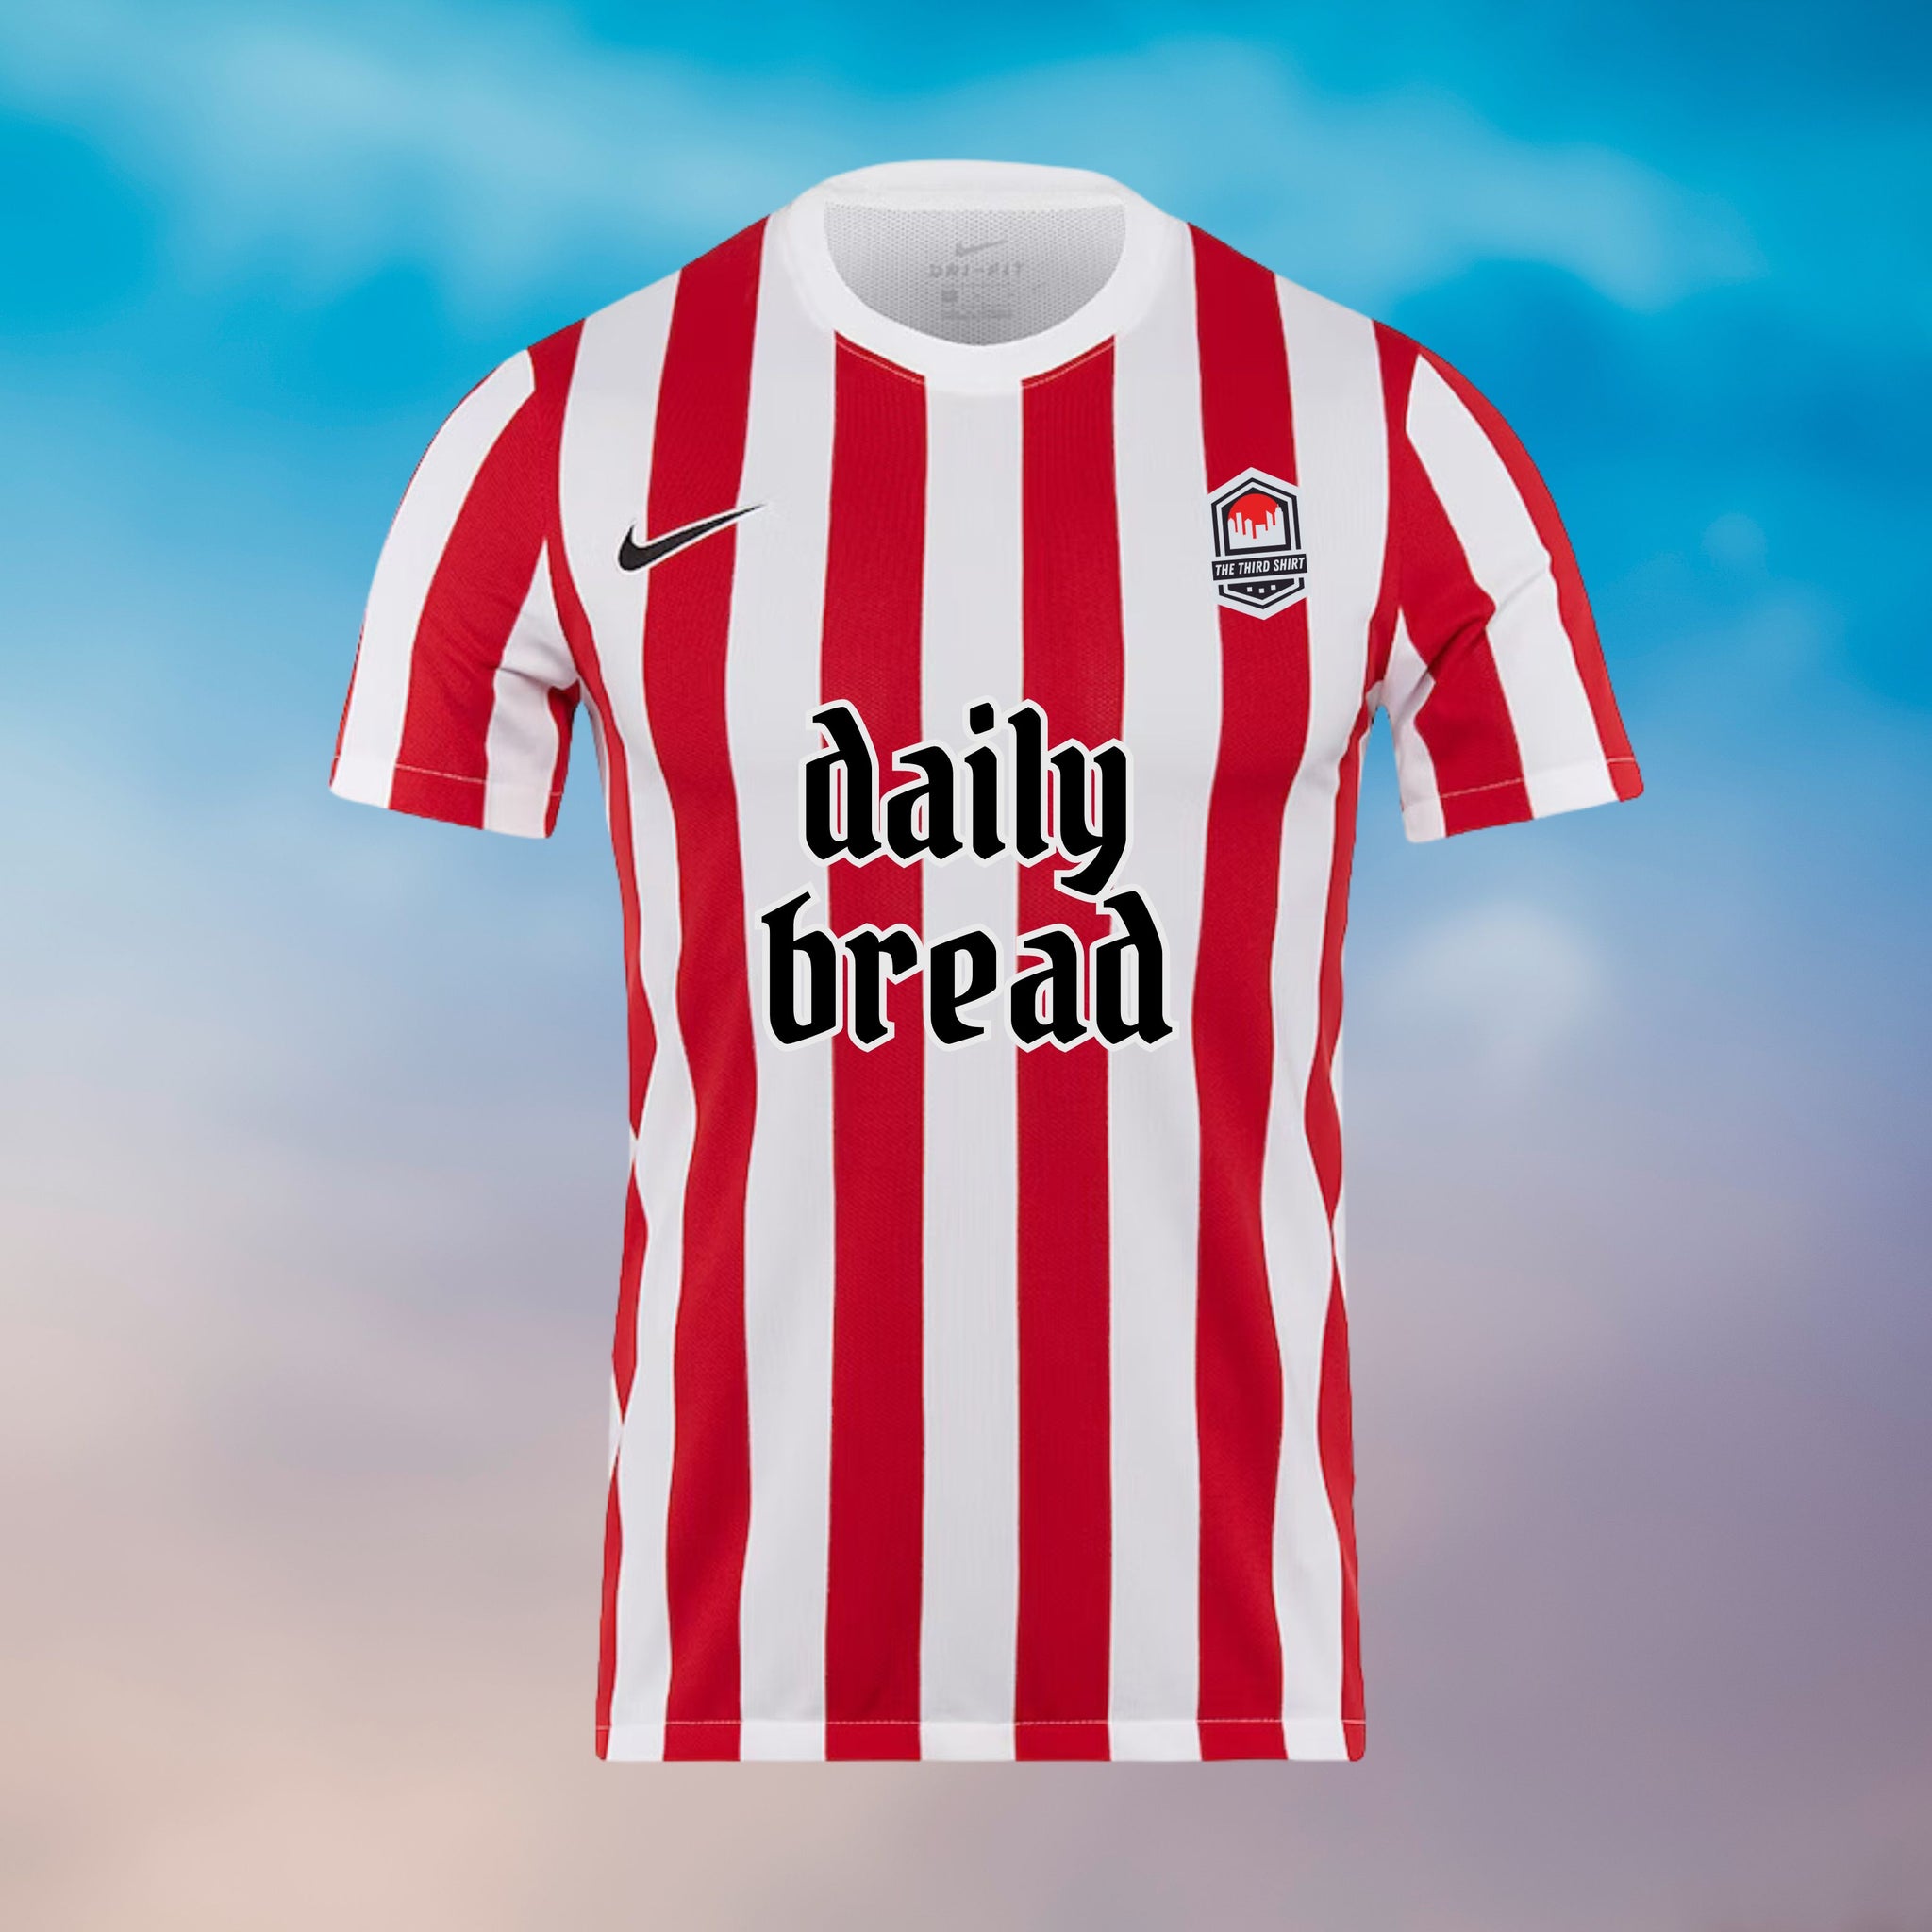 Daily Bread - Red/White - Nike Dri-FIT Striped Division Shirt